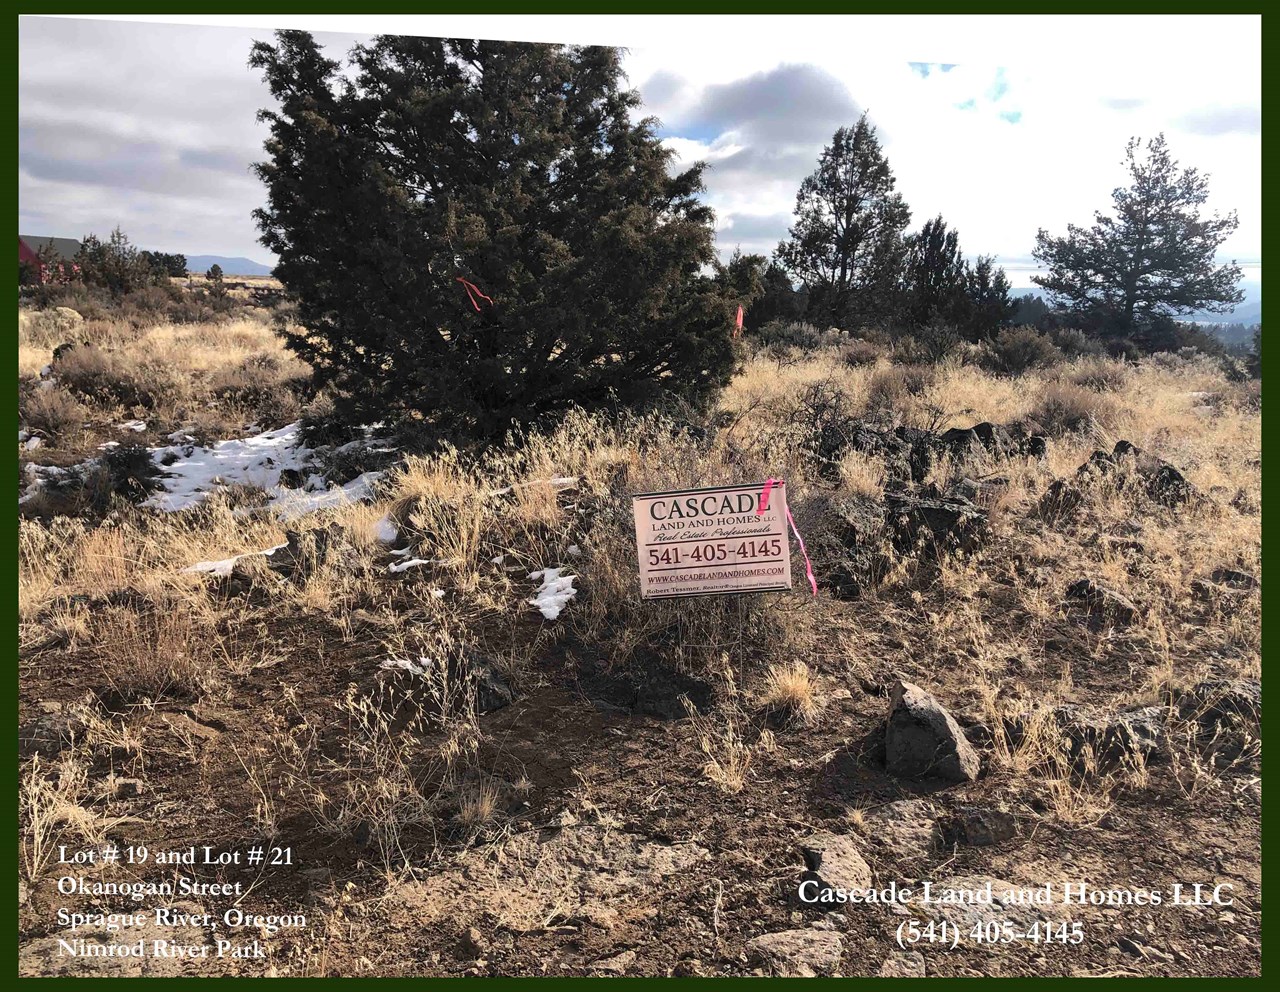 the property is easy to locate. the roads are compacted dirt and gravel. we had no trouble accessing the property without 4wd, although if you are out exploring the nearby area, it might be a good idea. look for our signs!